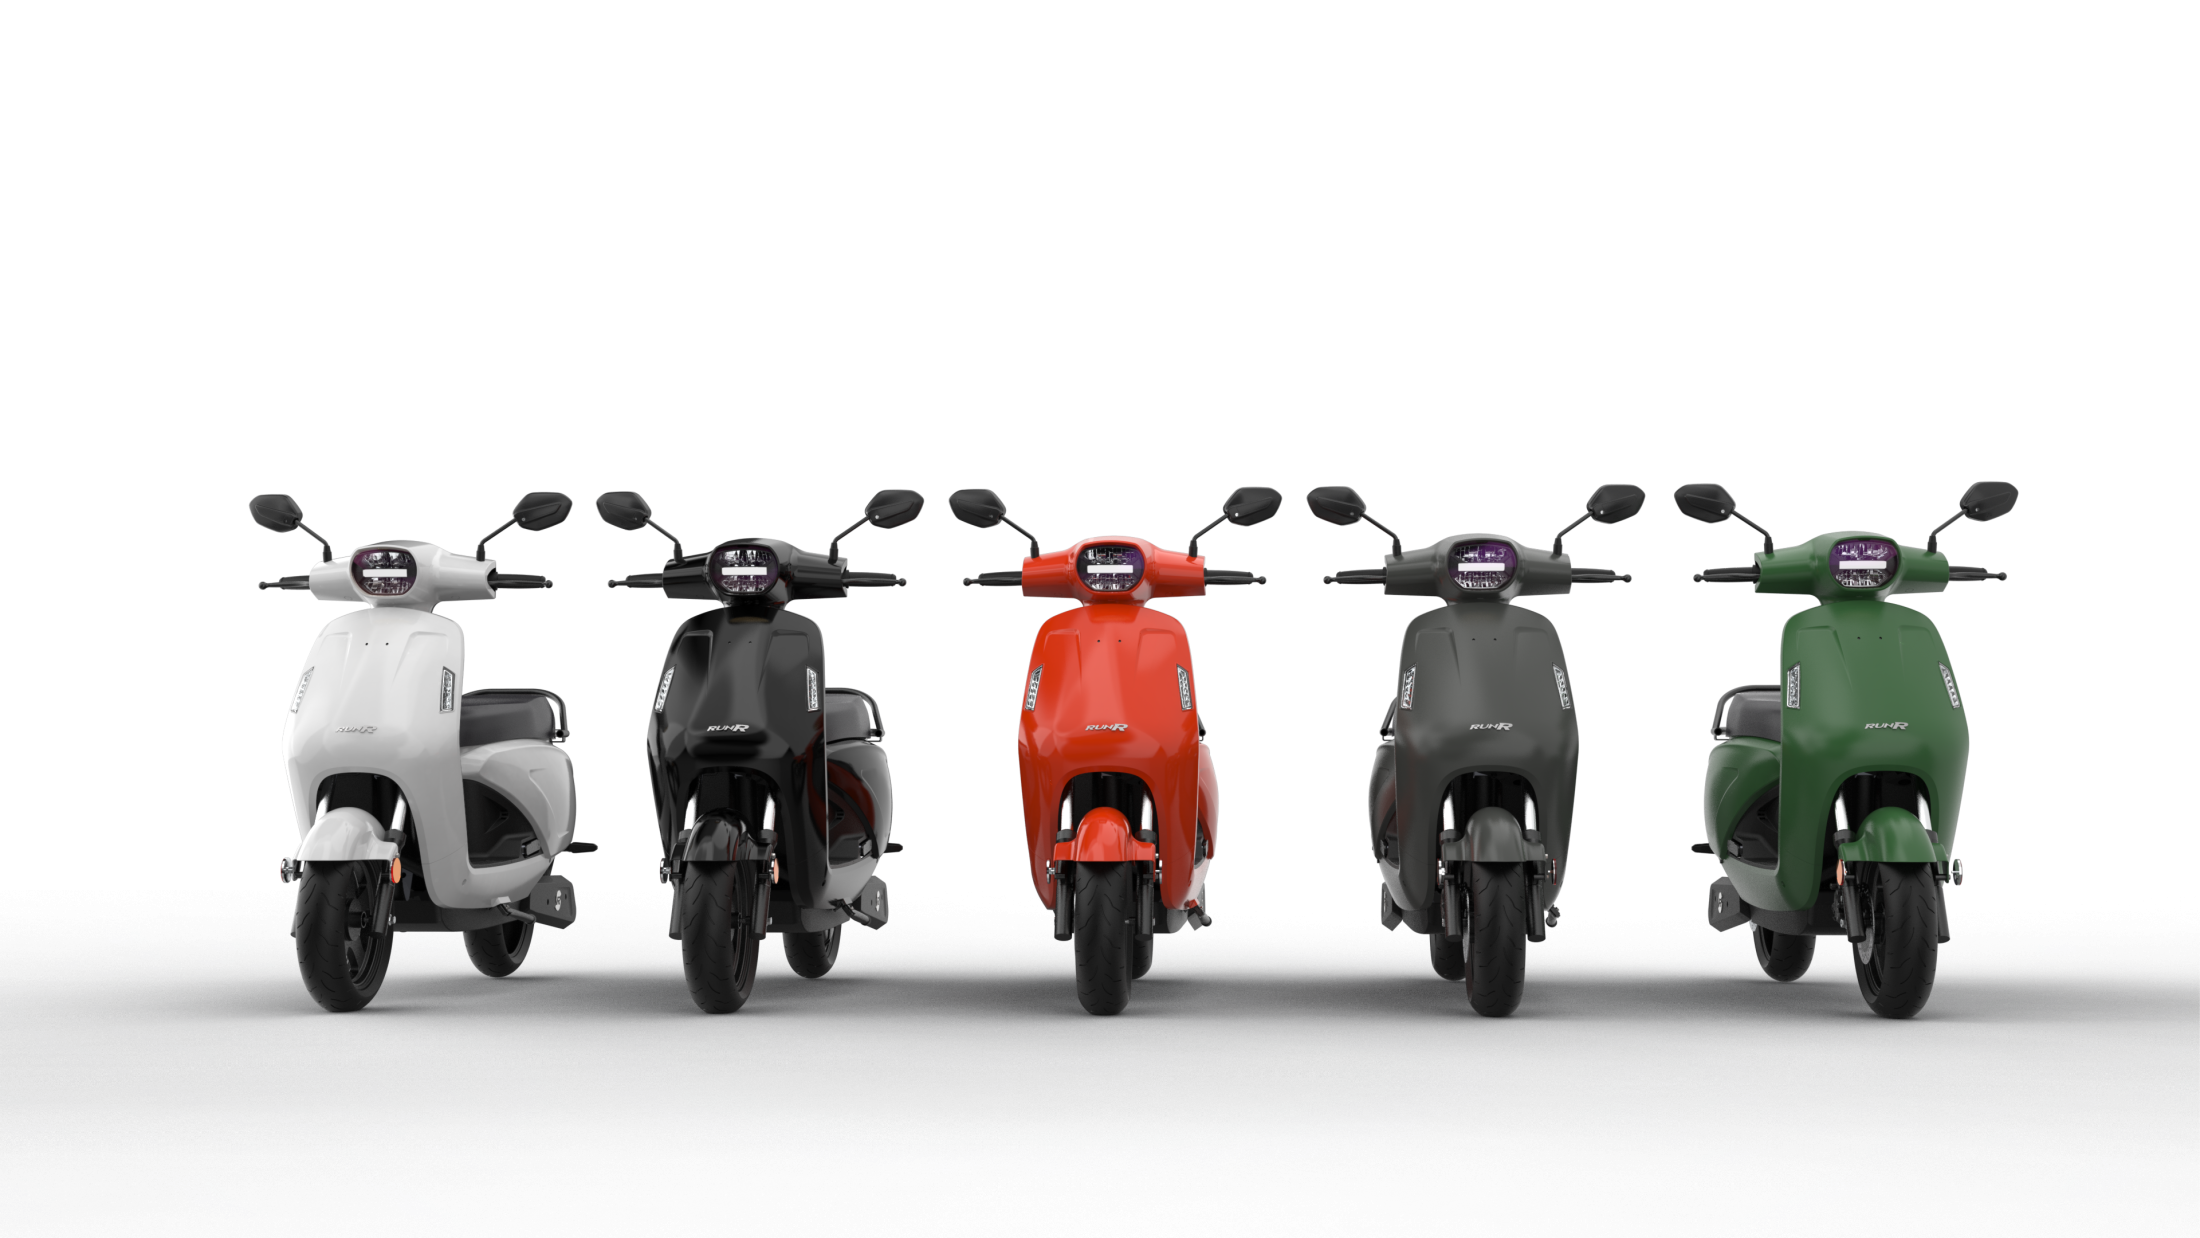 https://e-vehicleinfo.com/runr-mobility-launches-runr-hs-electric-scooter-in-india-range-110-km/